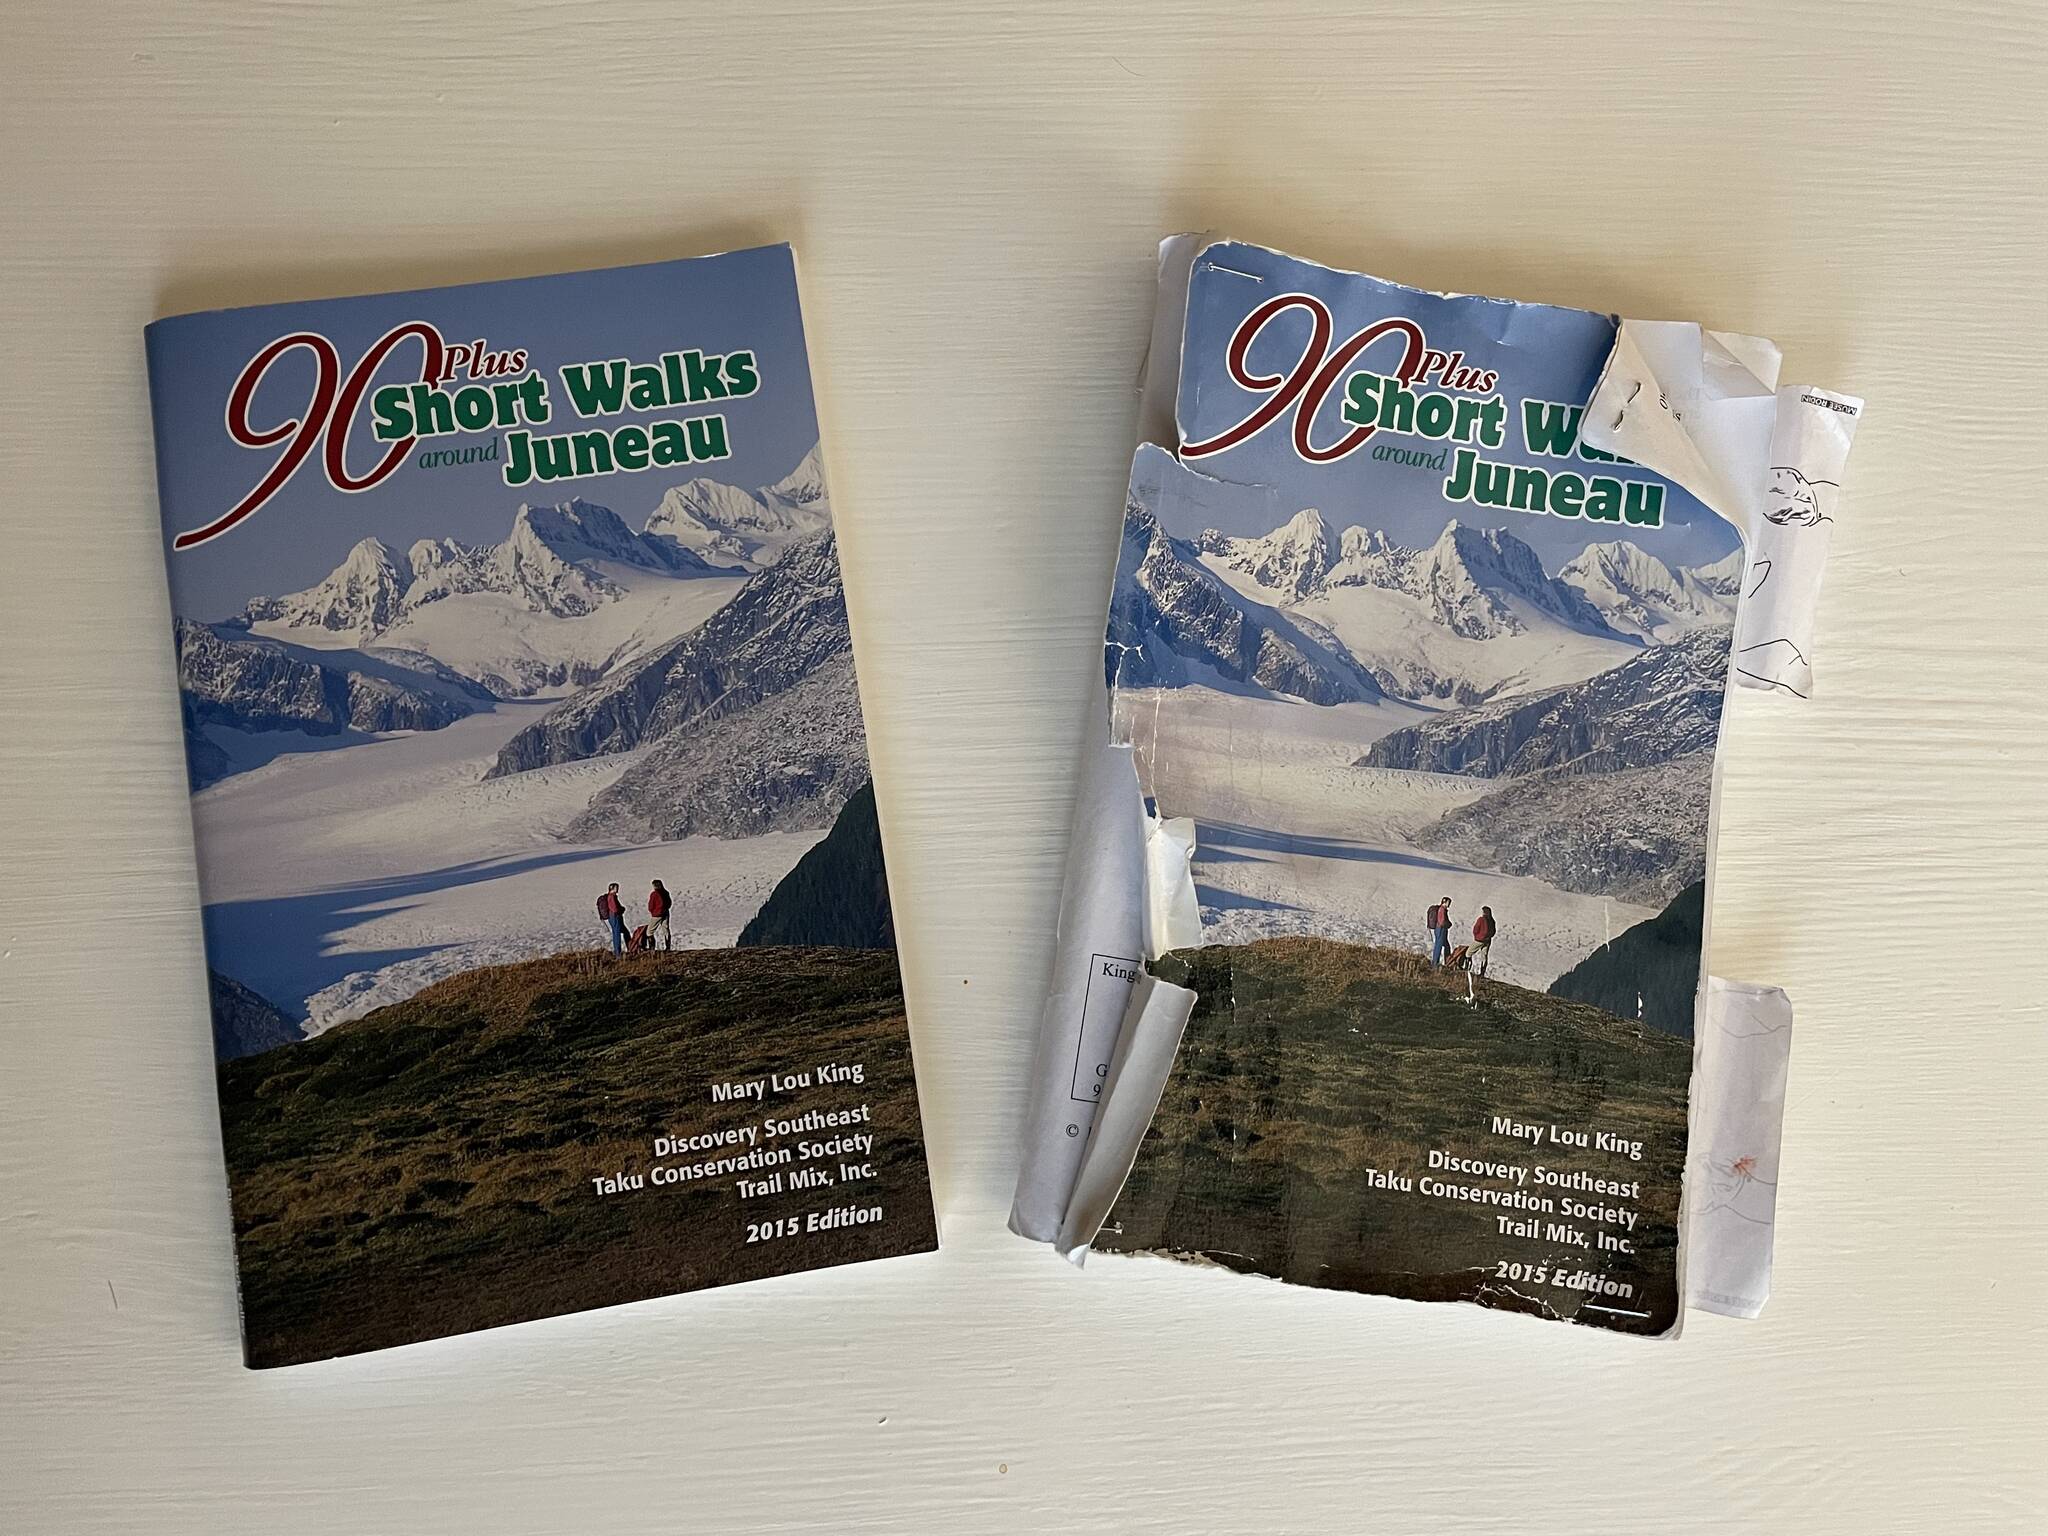 Lauren Cusimano / For the Juneau Empire 
A new and well-loved copy of “90 Plus Short Walks Around Juneau.”